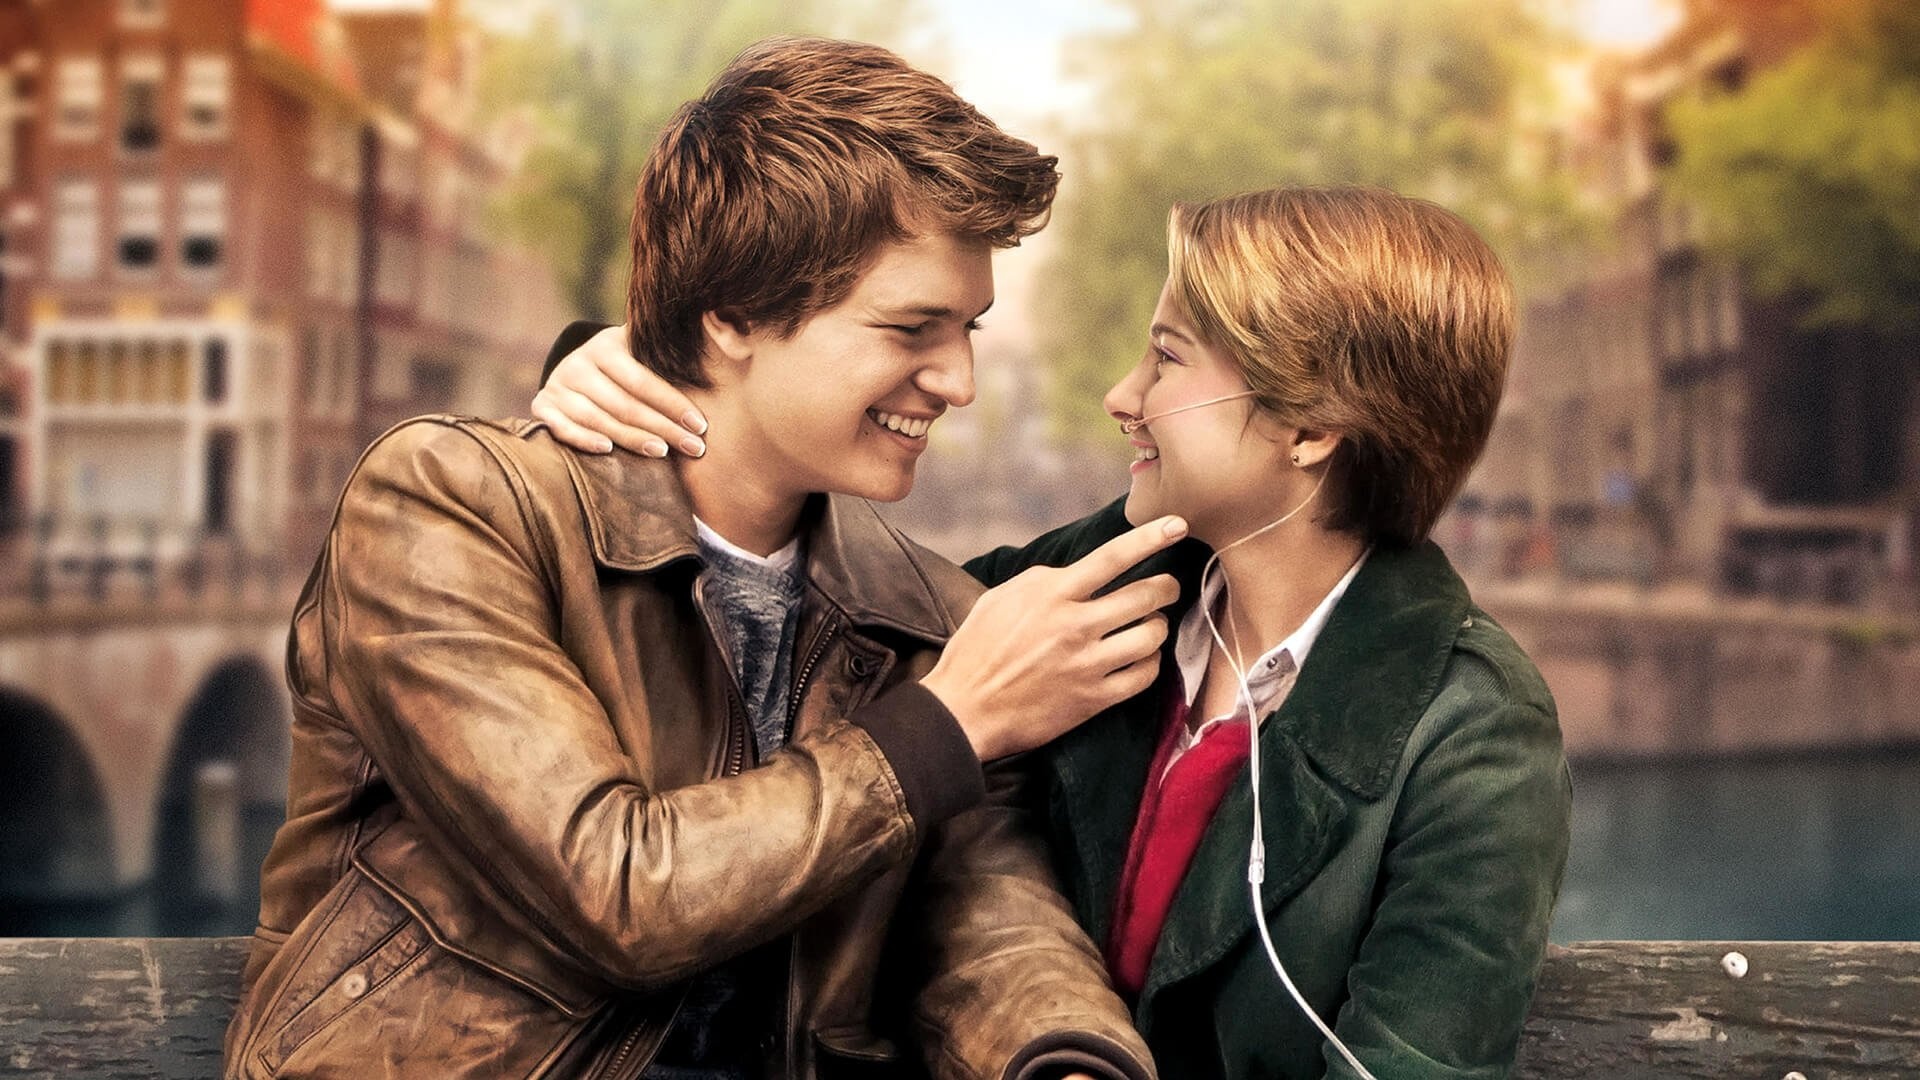 The Fault in Our Stars, Wallpaper, Background image, 1920x1080 Full HD Desktop